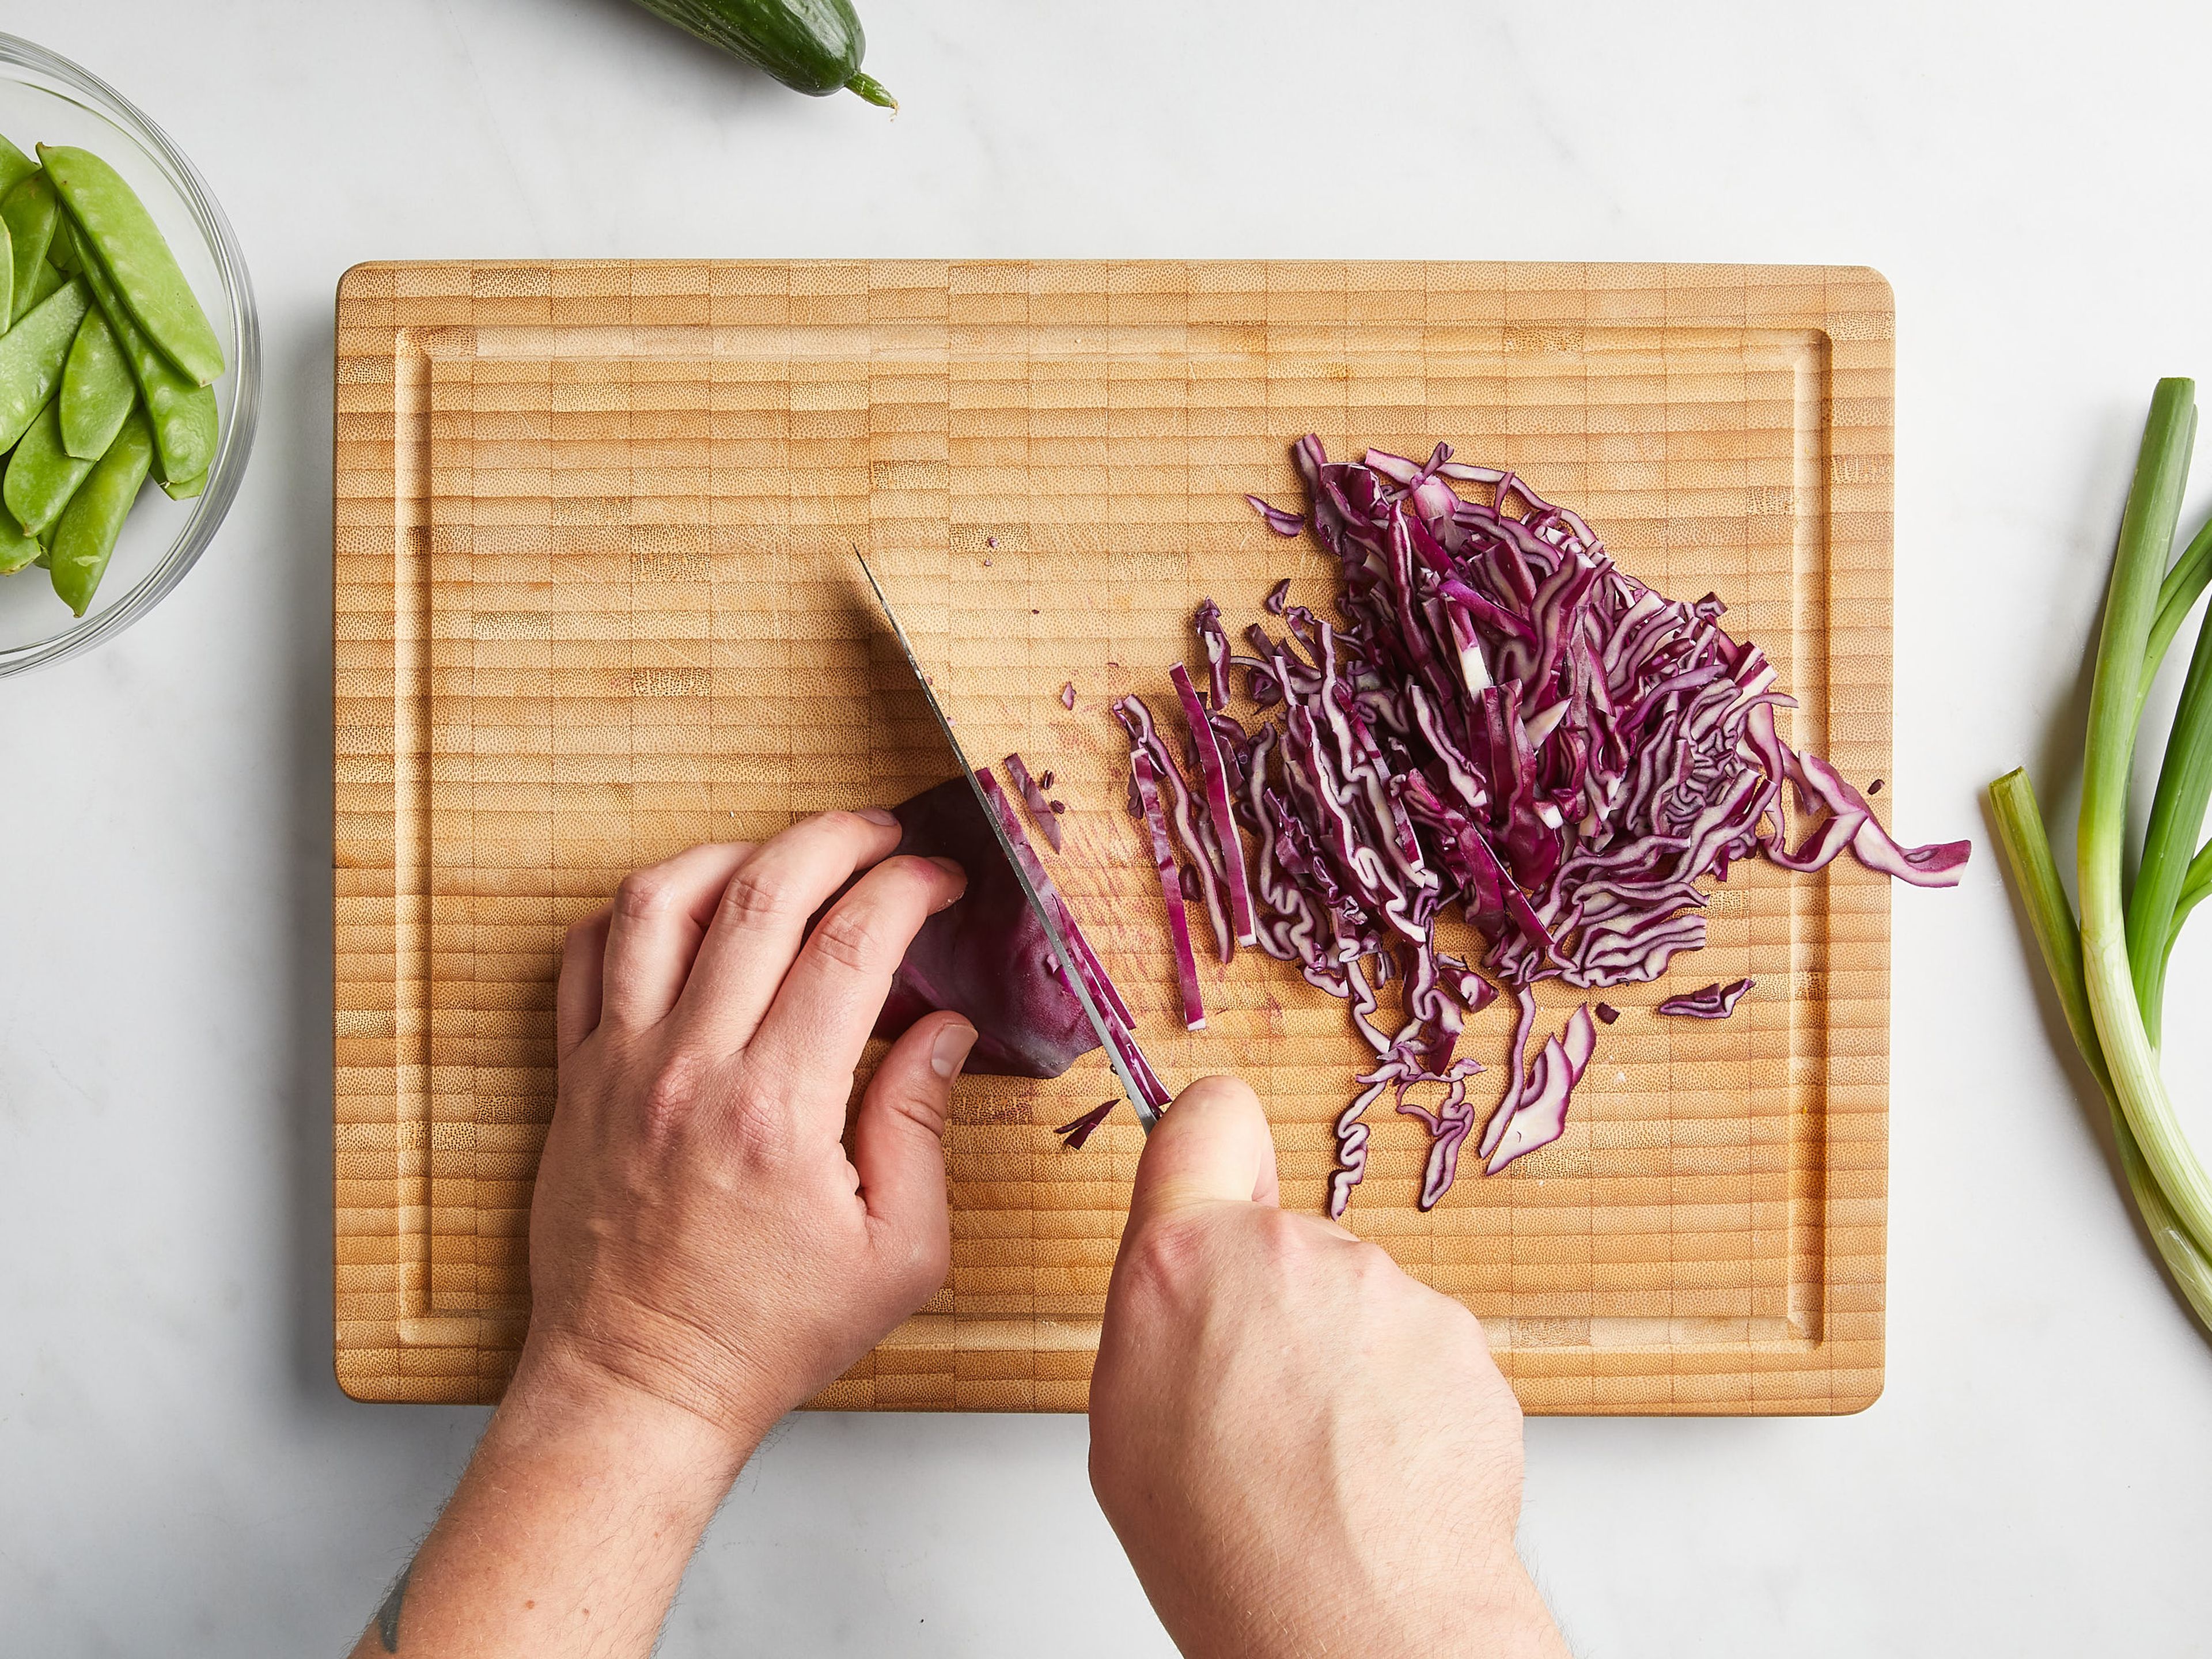 Bring a pot of water to a boil over medium-high heat. In the meantime, slice the cucumber into thin strips. Thinly slice the scallions. Chop up the red cabbage. Slice the snow peas into bite-sized pieces. Cut the stems and leaves of the cilantro. Roughly chop the peanuts.